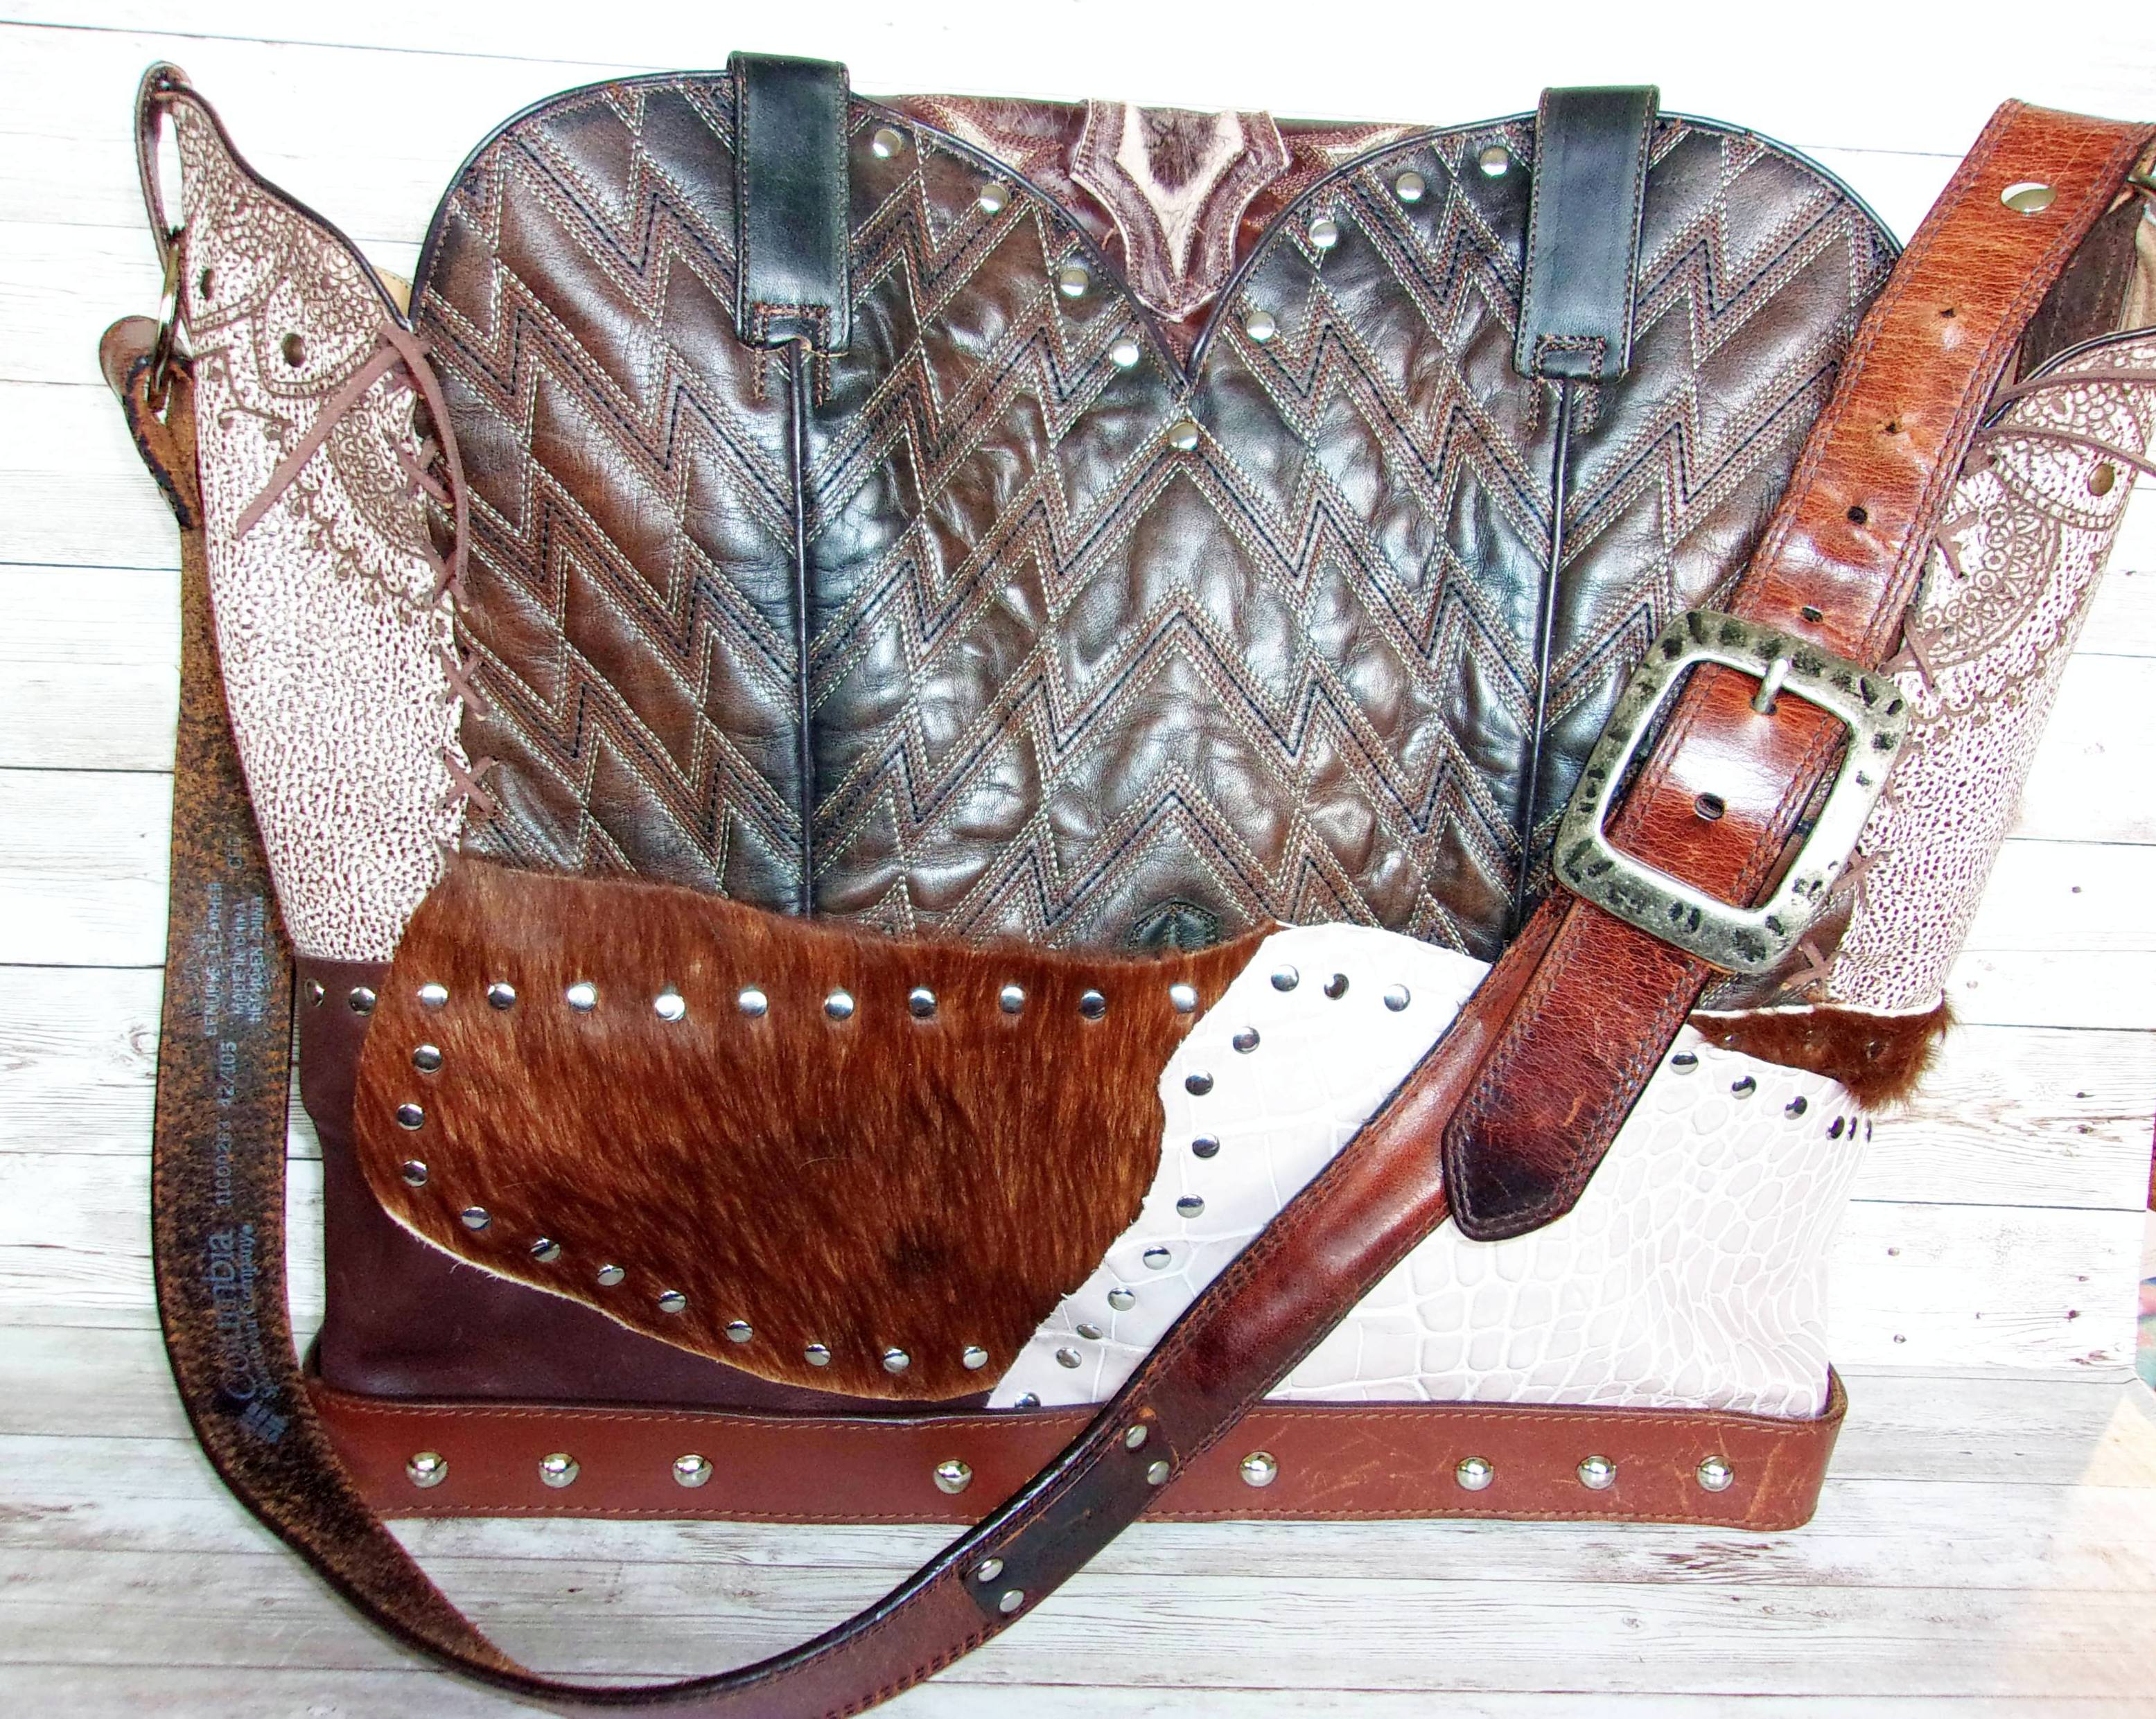 Western Laptop Tote - Extra Large Cowboy Boot Purse - Western Travel Bag LT36 cowboy boot purses, western fringe purse, handmade leather purses, boot purse, handmade western purse, custom leather handbags Chris Thompson Bags